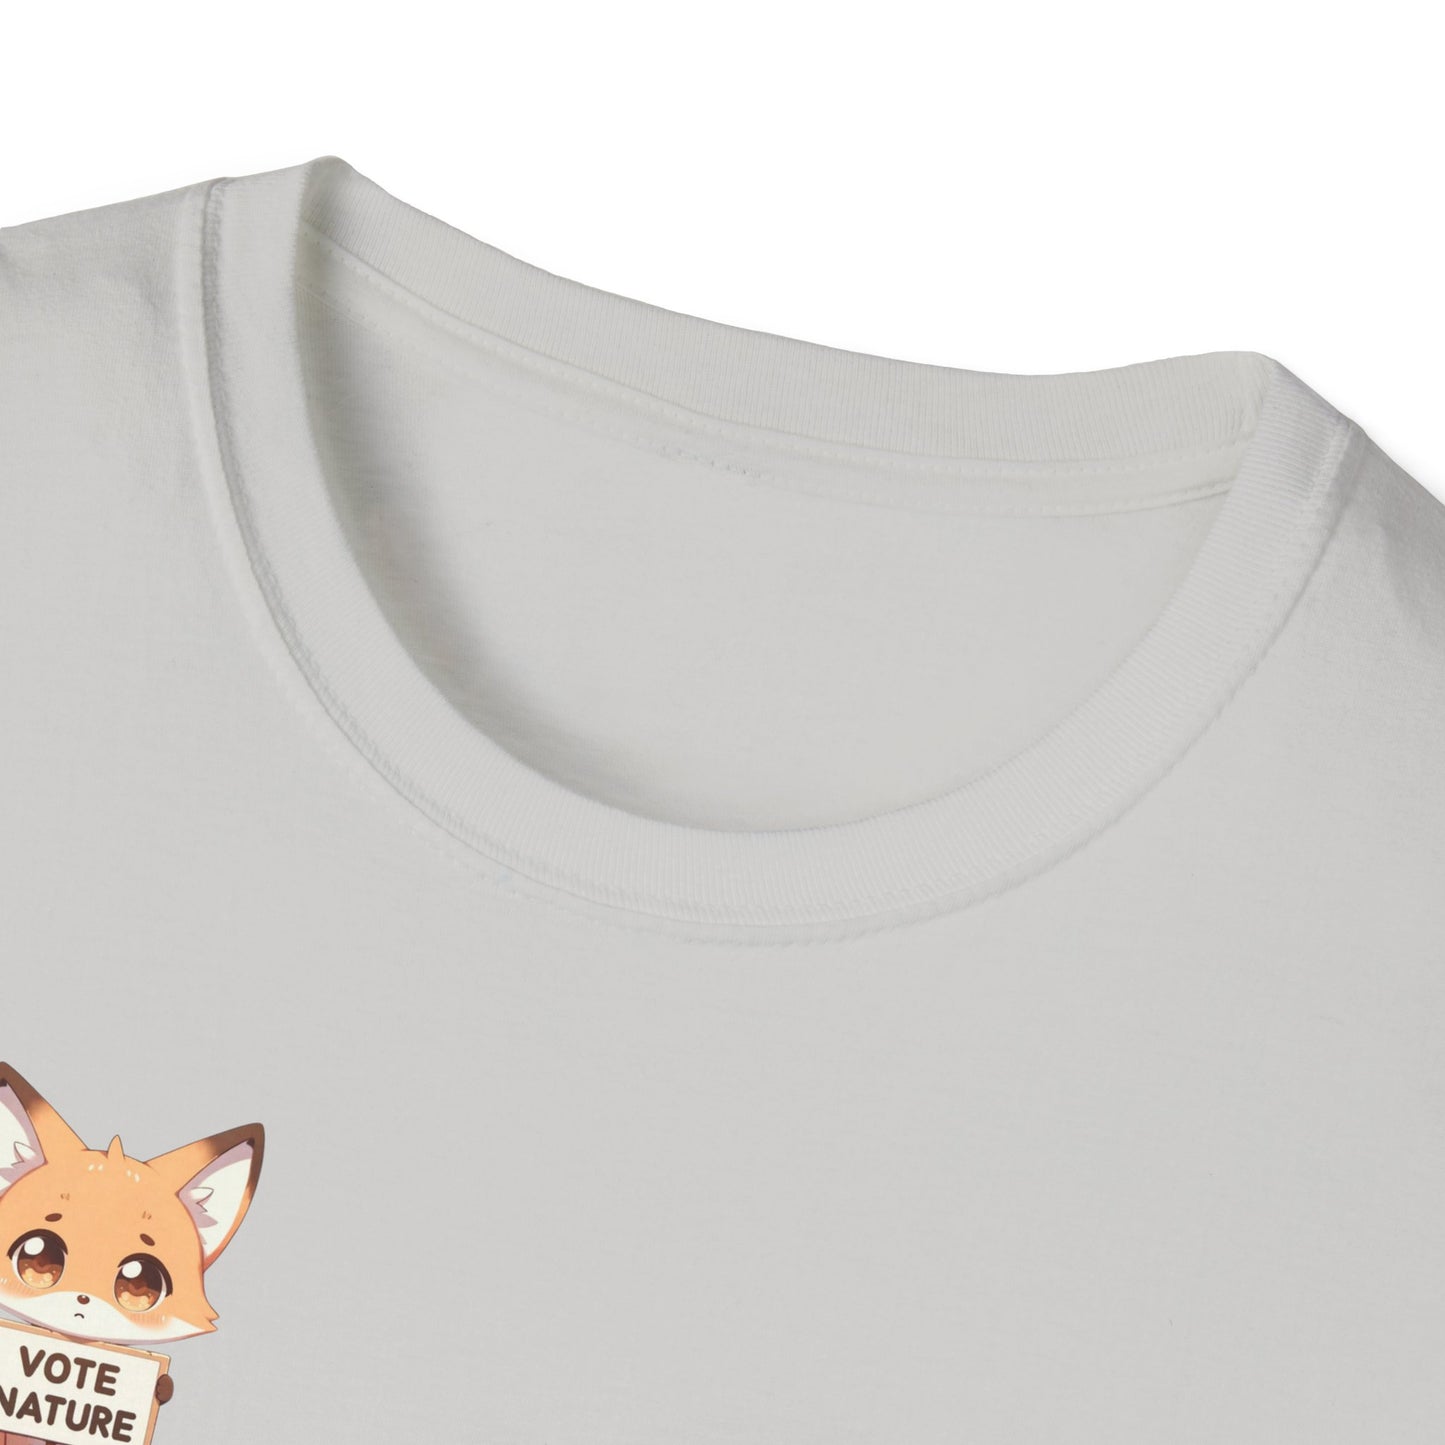 Inspiring Cute Fox Statement Soft Style t-shirt: Vote Nature |unisex| Minimalist Protest, Resistance, Activism, and Strong! Show You Care!